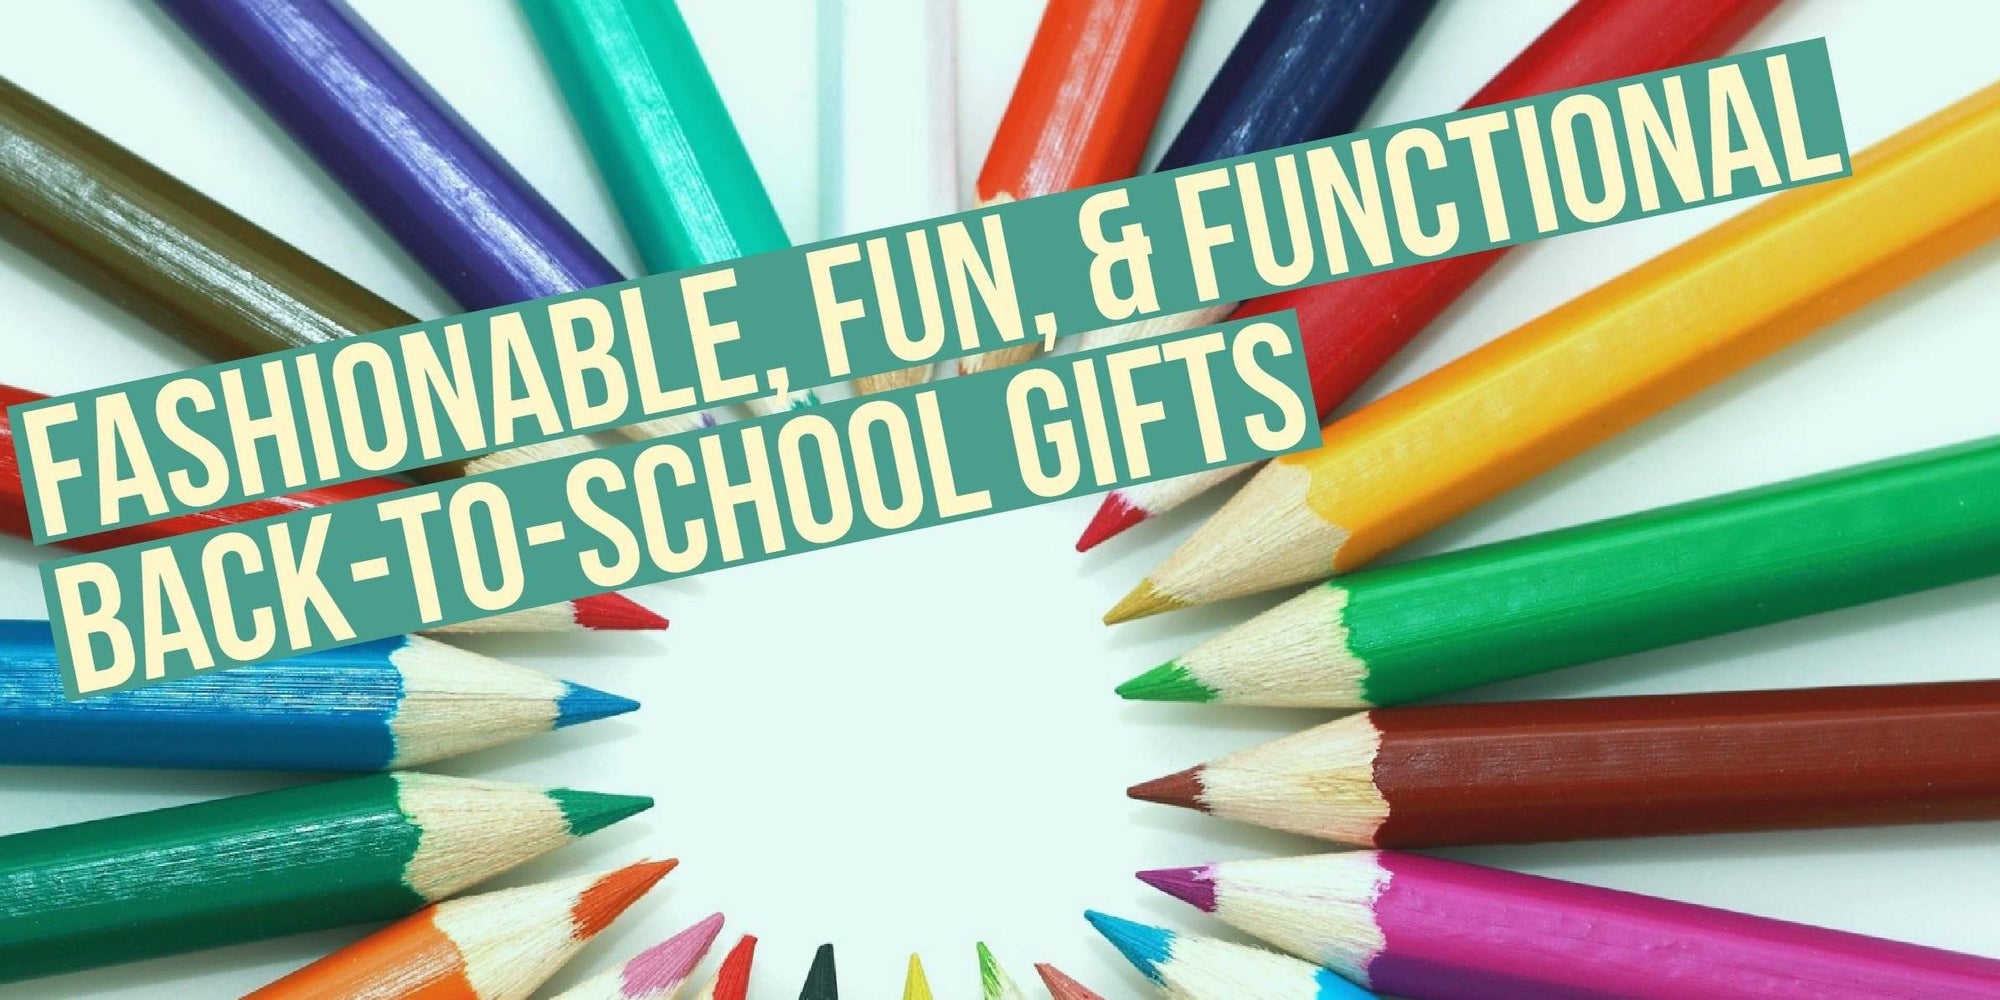 Fashionable, Fun, & Functional Back-to-School Gifts